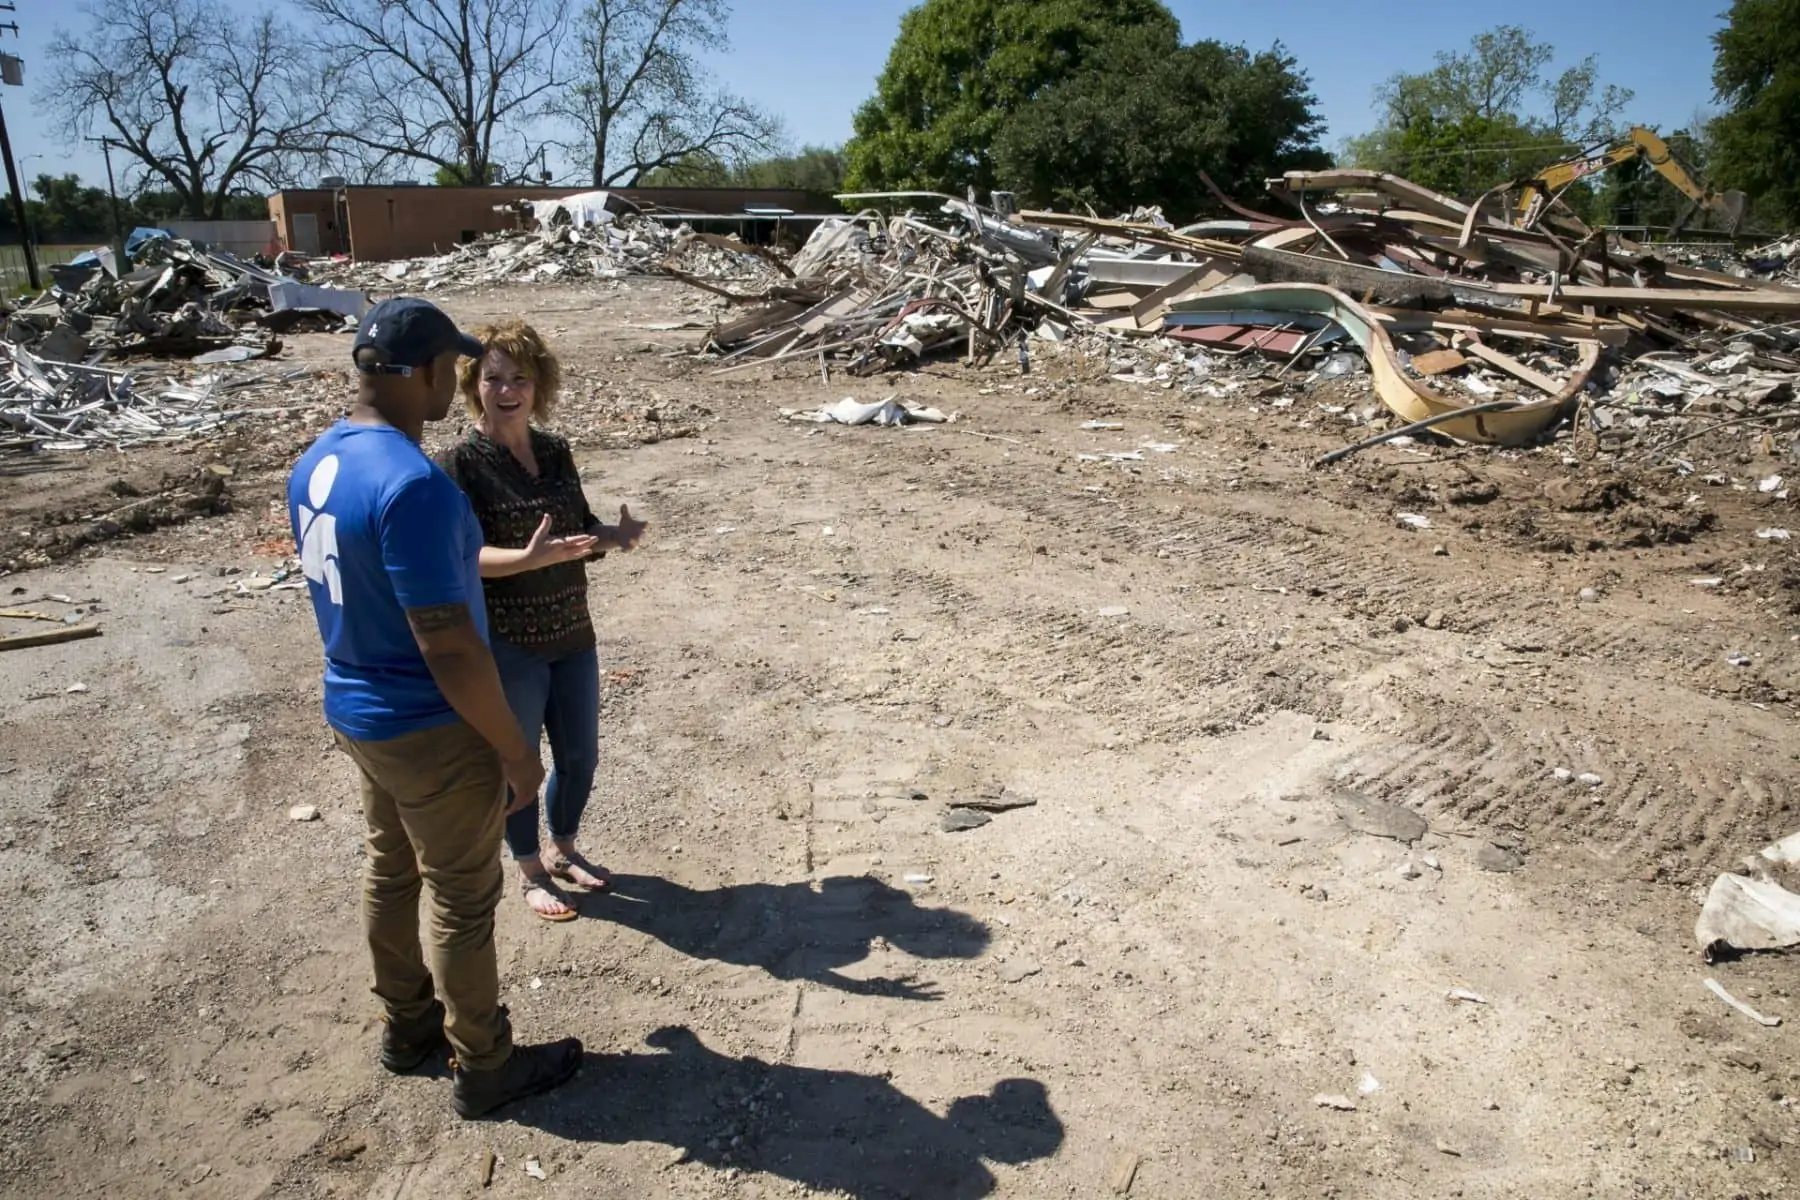 Stephanie Konvicka, who is organizing psychosocial programs for the Matagorda Episcopal Health Outreach Program to help Hurricane Harvey survivors cope with stress and trauma, gives Americares relief worker Curtis Barnes a tour of the storm recovery in her hometown of Wharton, Texas. Here they observe the demolition of the Just Do it Now community center, which was badly damaged in the storm. Konvicka is organizing yoga and art therapy classes to help community members come together and heal with funding from Americares Hurricane Harvey Recovery Program.